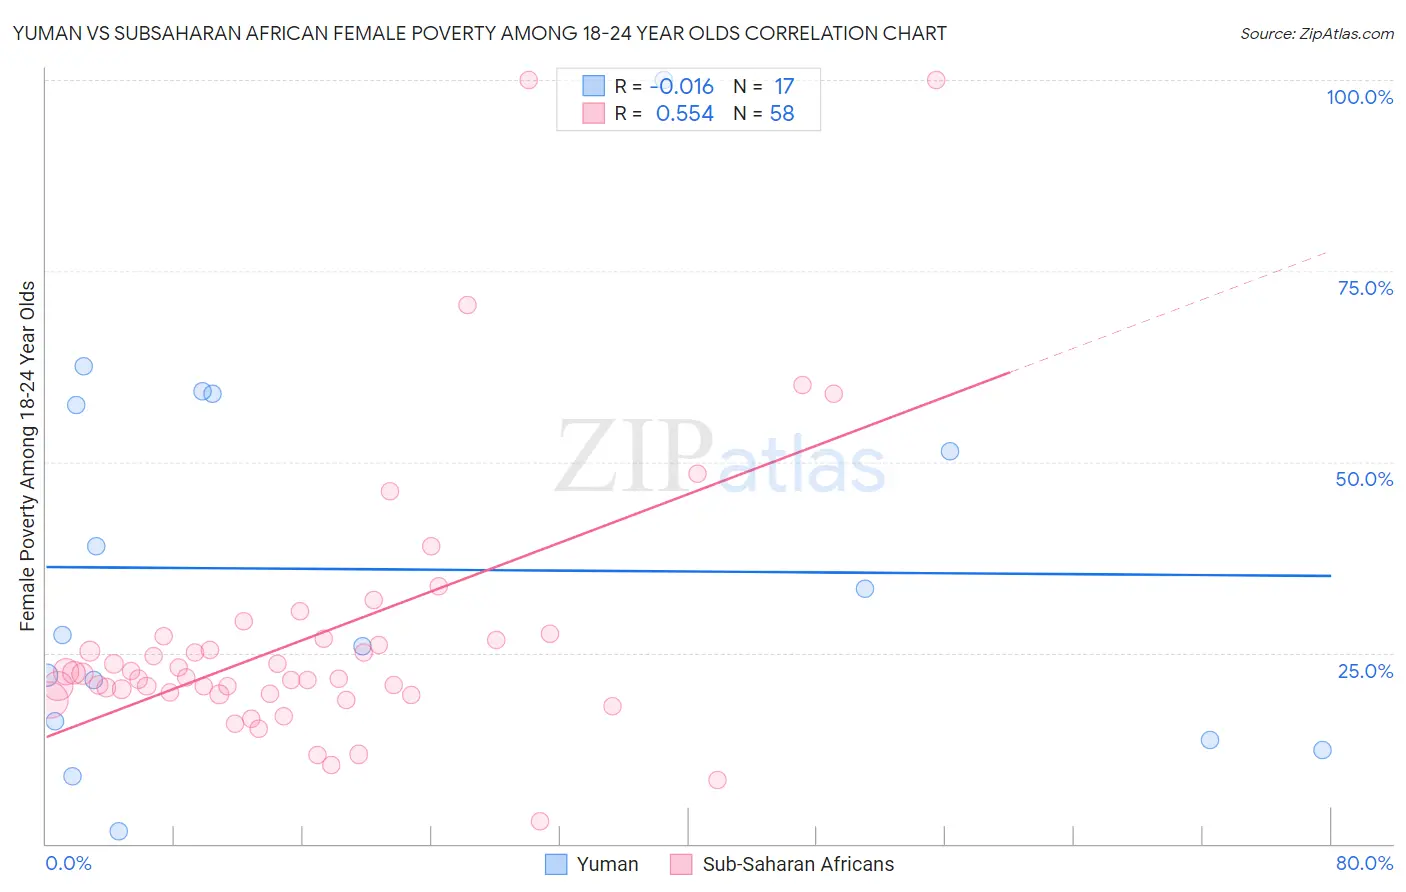 Yuman vs Subsaharan African Female Poverty Among 18-24 Year Olds